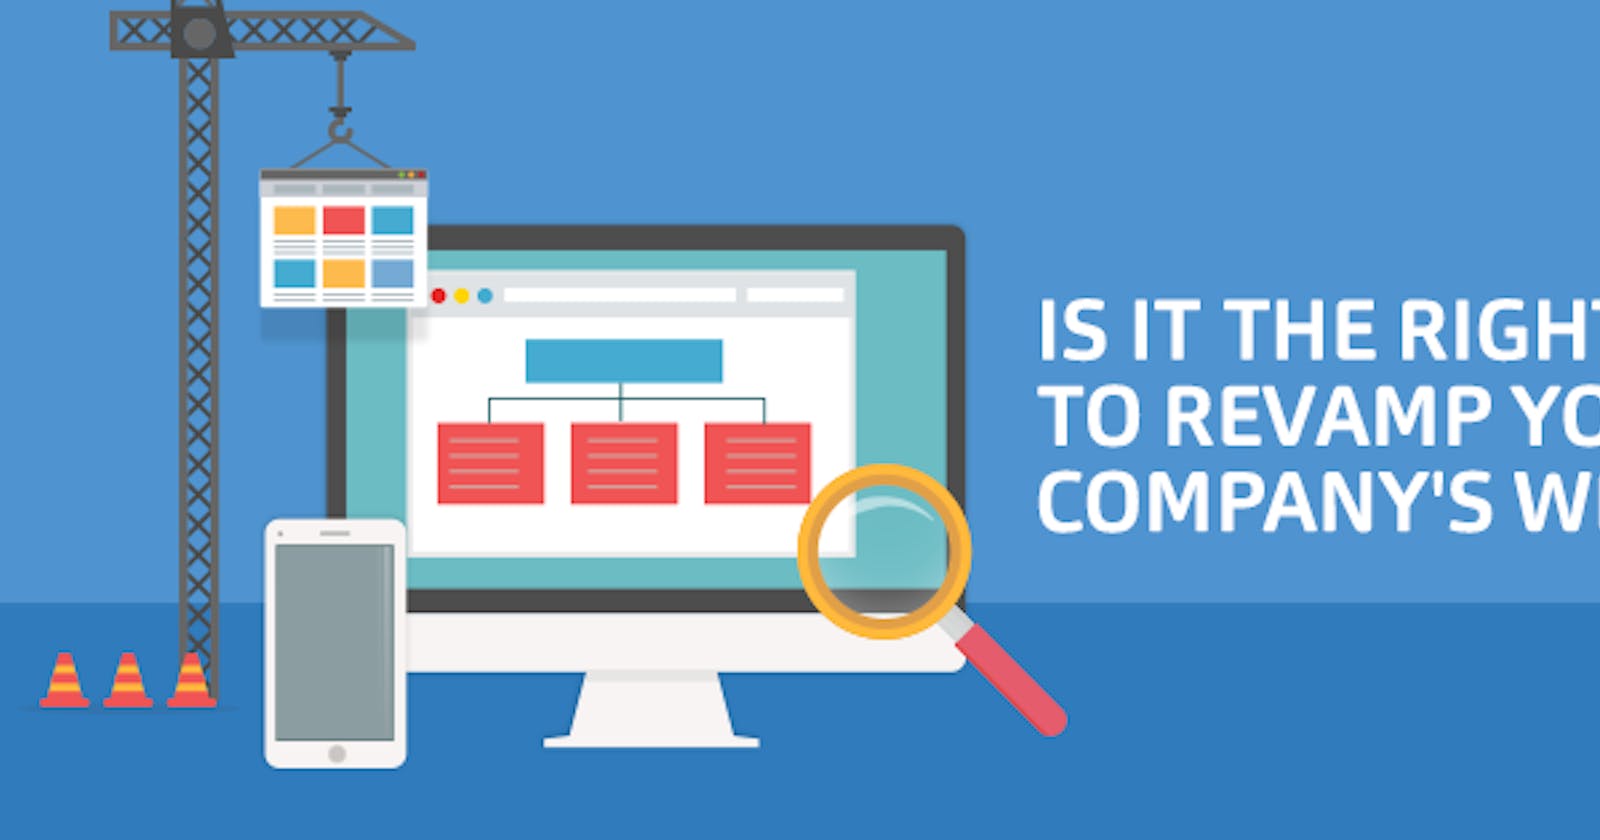 Is It the Right Time to Revamp Your Company’s Website?